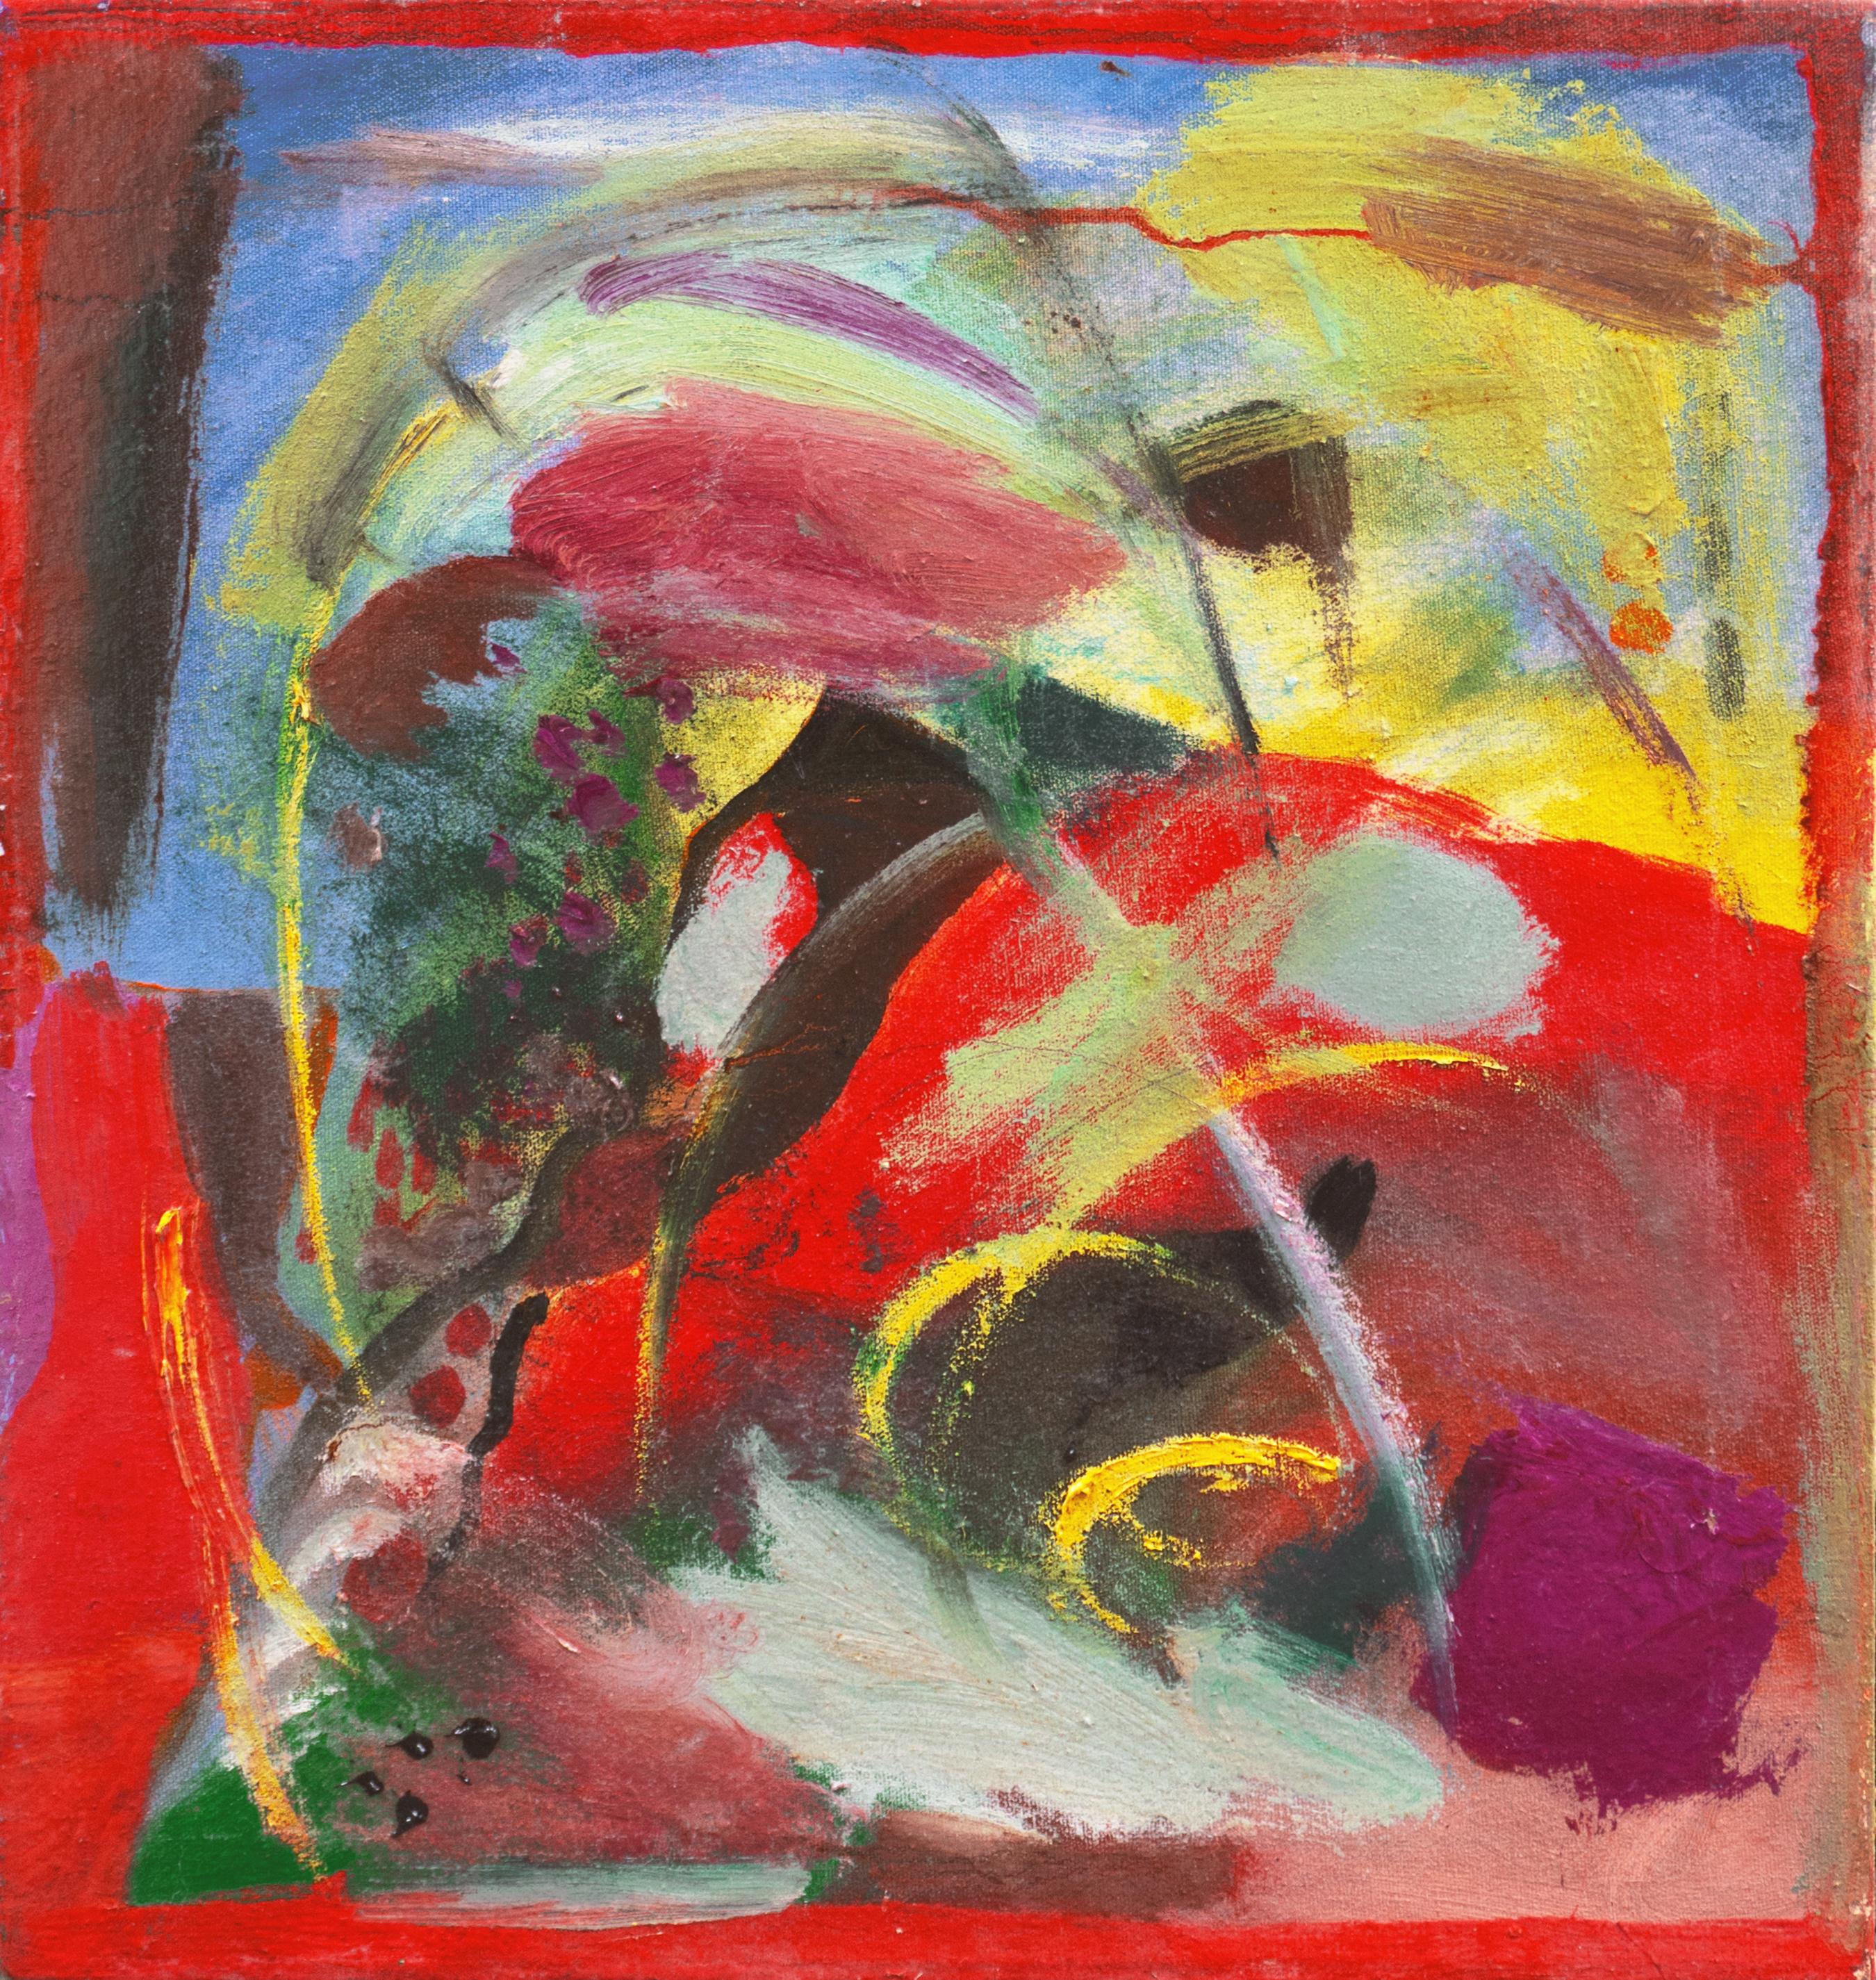 Charles Barr Abstract Painting - 'Abstract, Citron & Scarlet', American Abstraction, Pittsburgh, Freeman Center